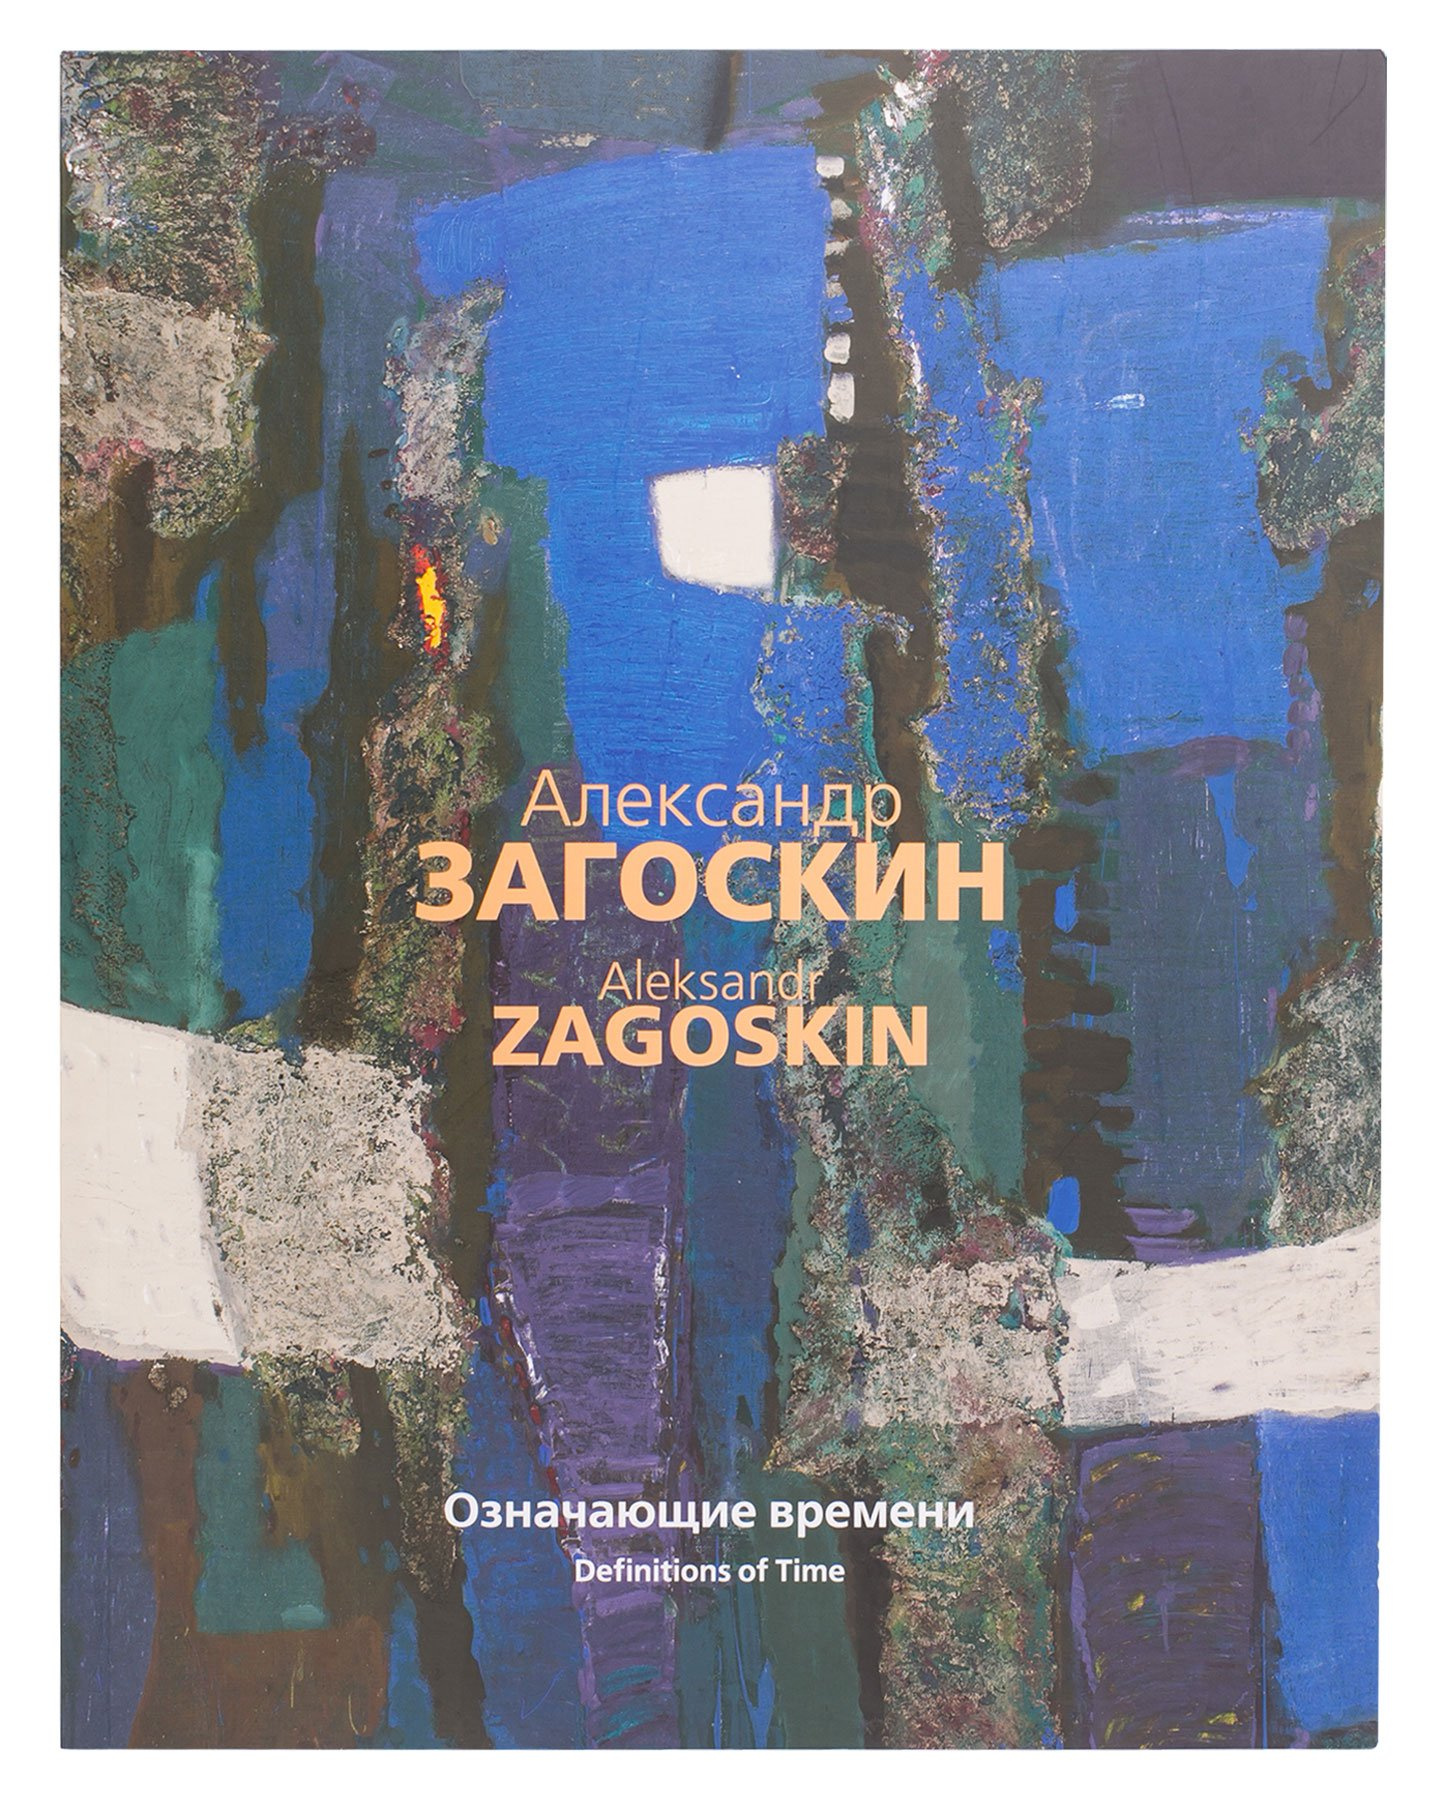 Catalog «Alexander Zagostkin. Meanings of Time»